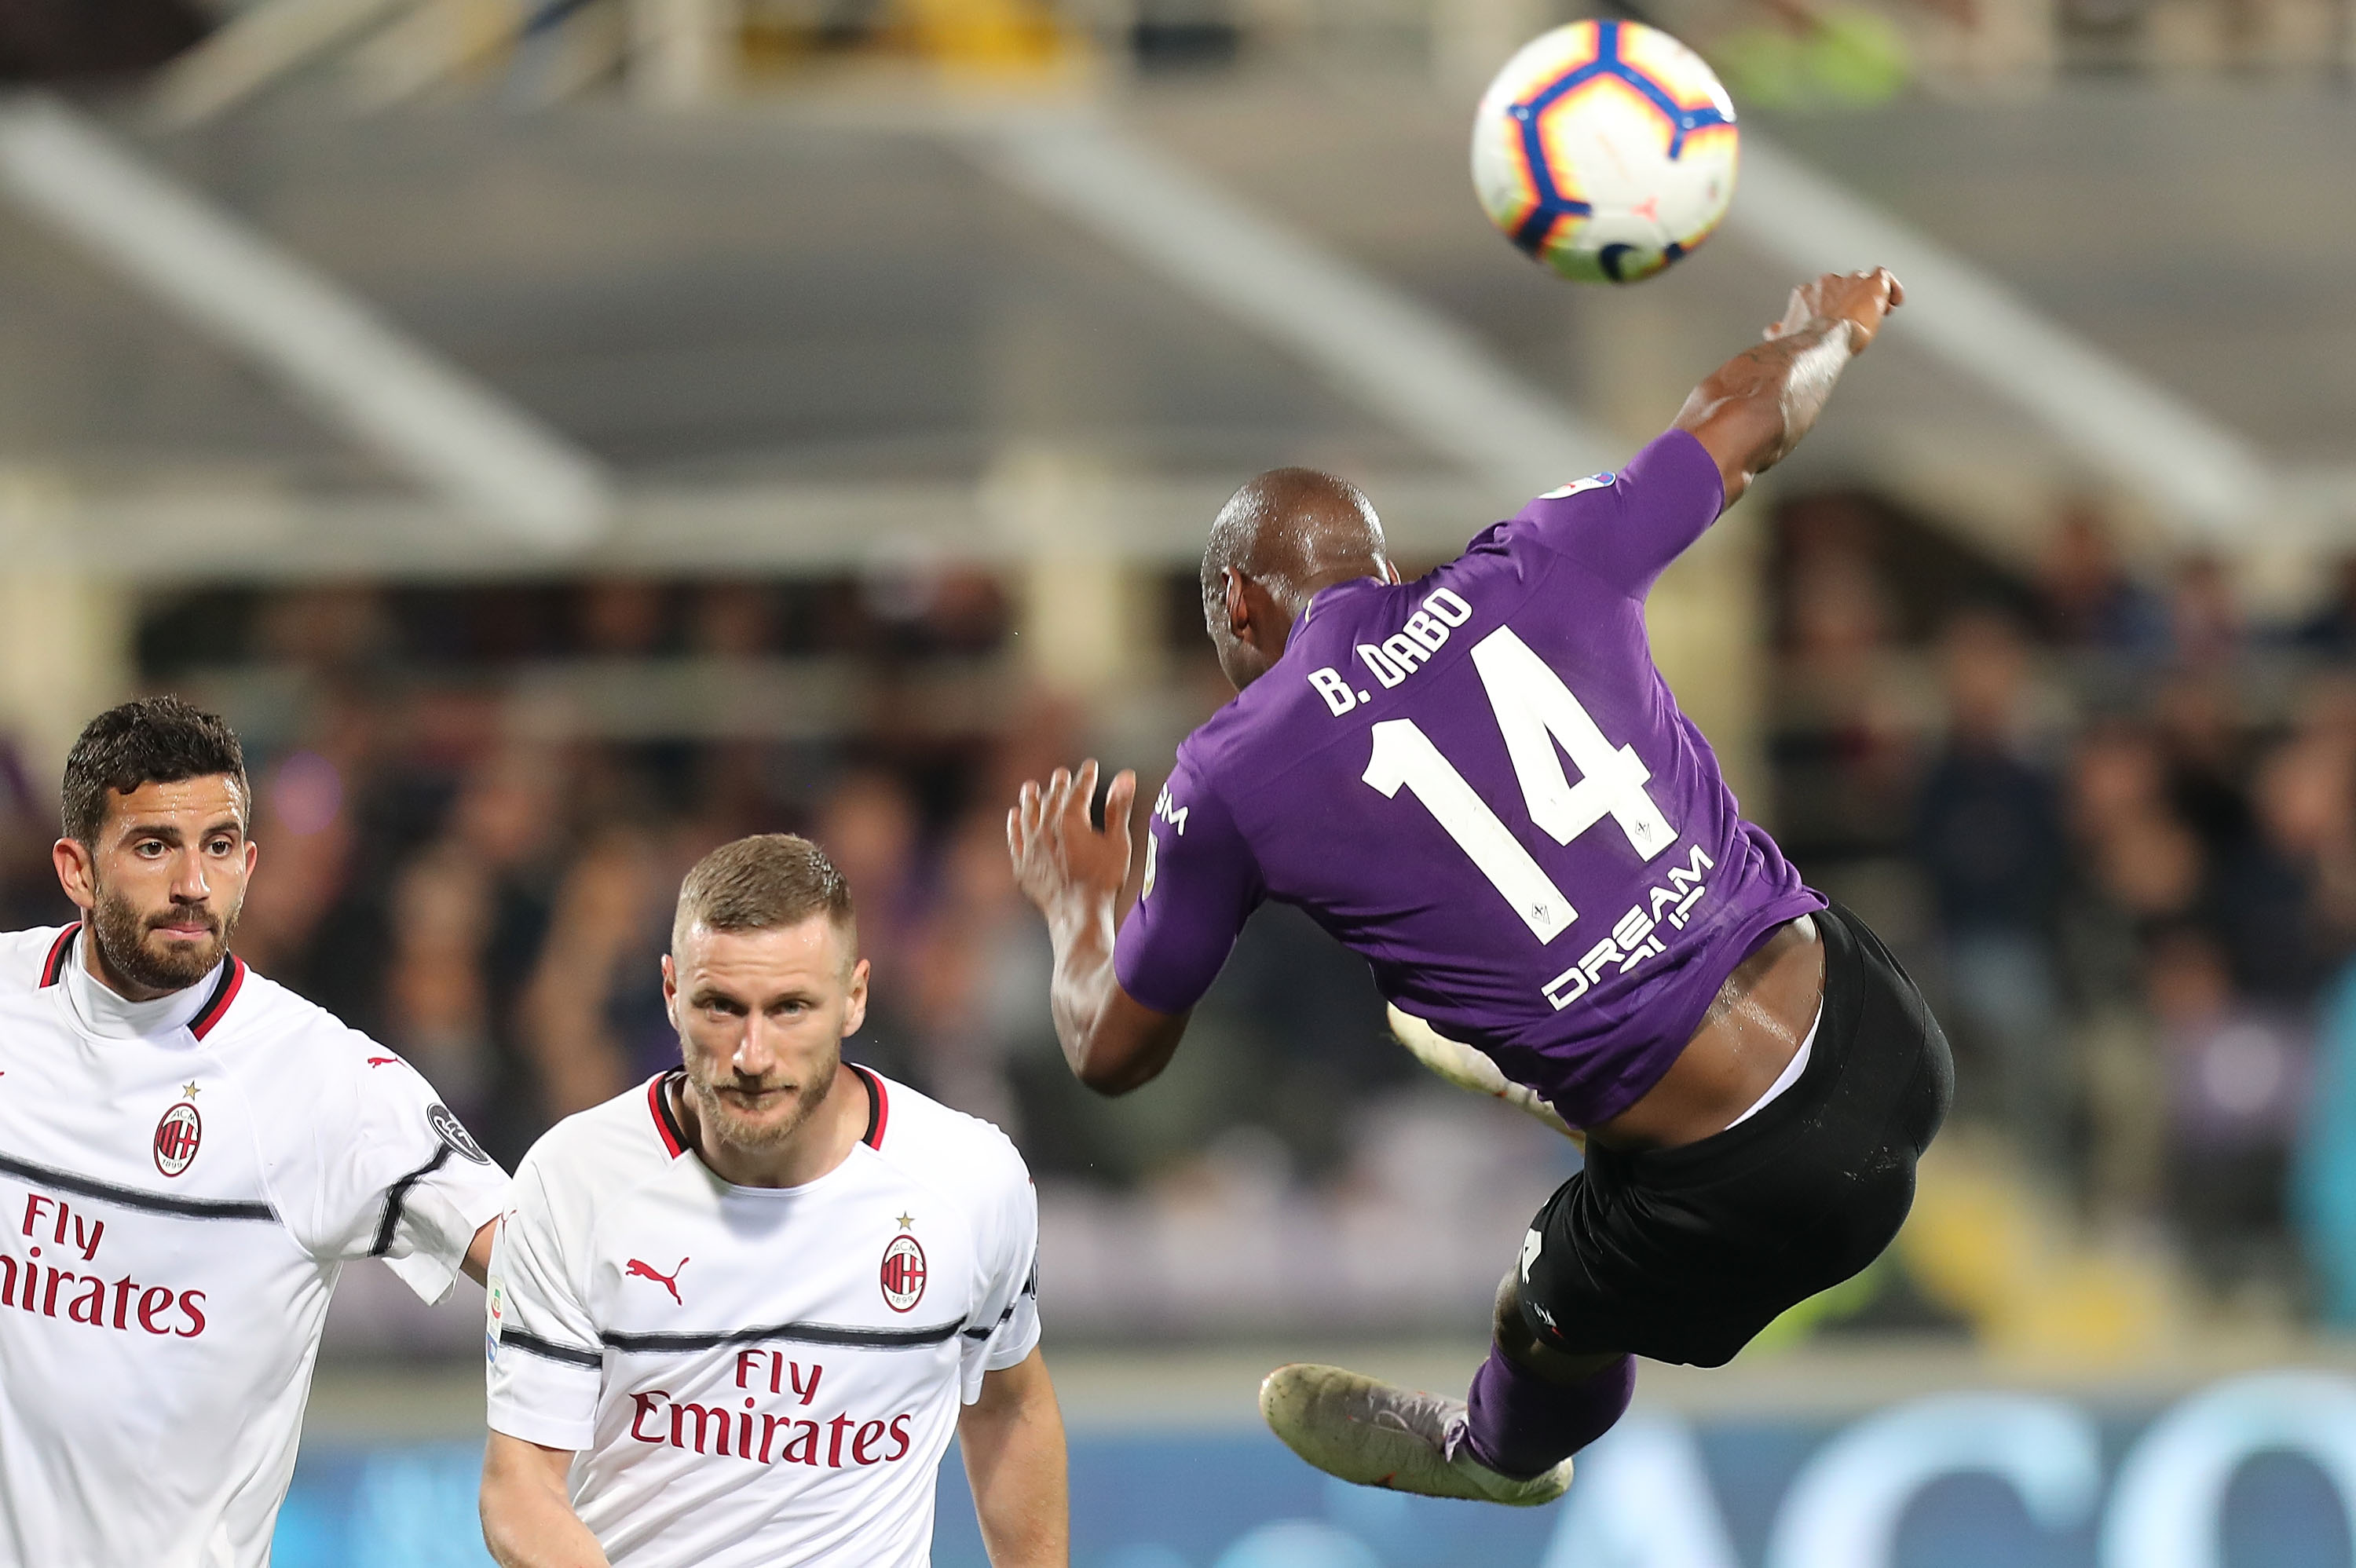 FLORENCE, ITALY - MAY 11: Bryan Dabo of ACF Fiorentina in action during the Serie A match between ACF Fiorentina and AC Milan at Stadio Artemio Franchi on May 11, 2019 in Florence, Italy.  (Photo by Gabriele Maltinti/Getty Images)